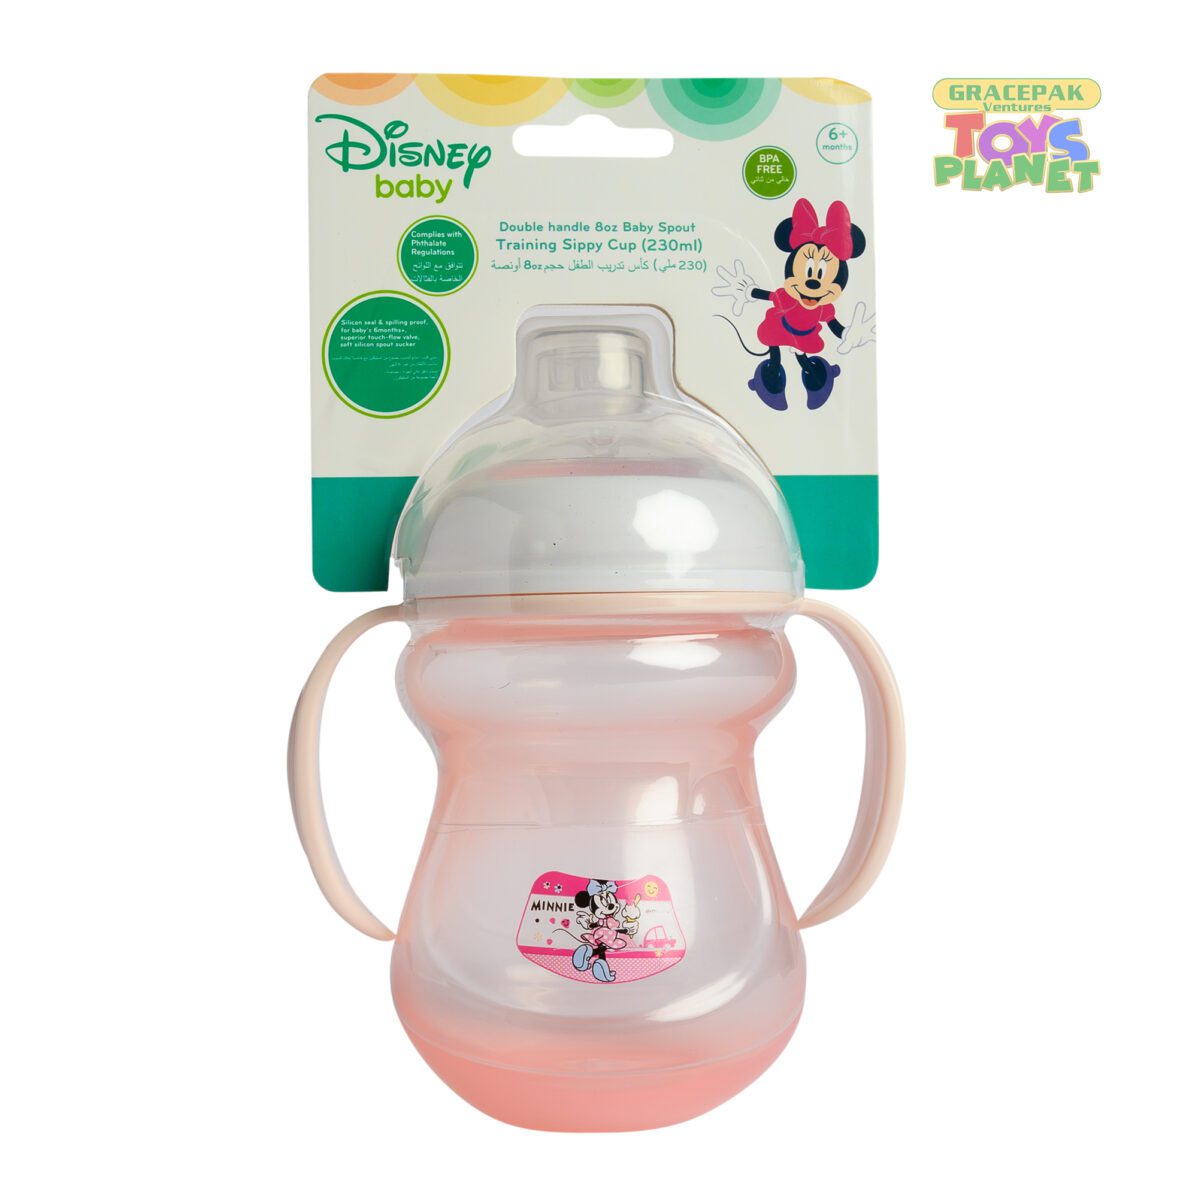 Disney Baby Spout Cup with handle 12 Months+, 250ml, – Minnie Mouse Pink